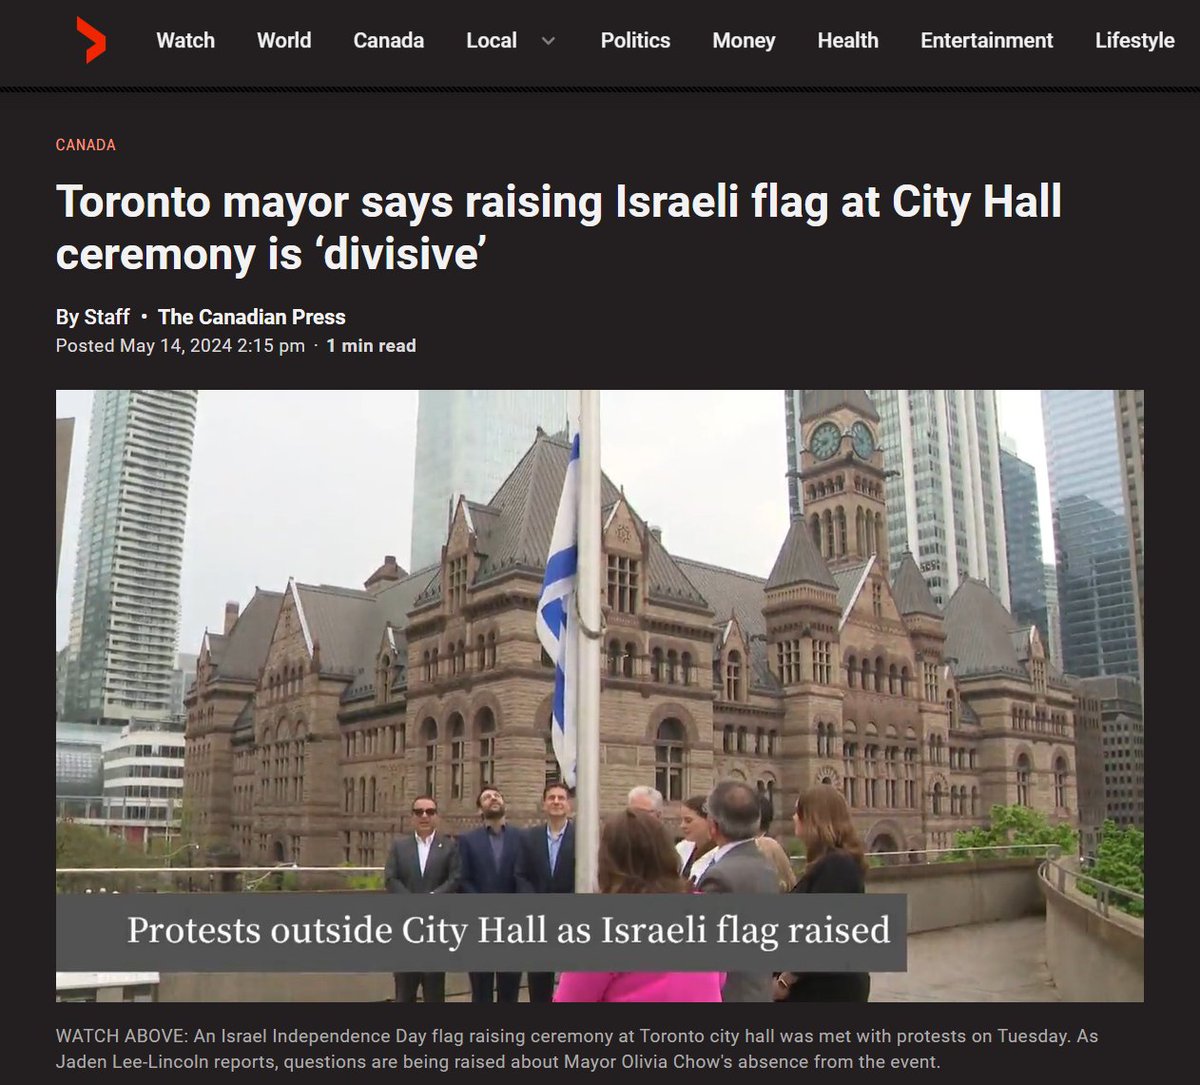 Yom Ha’atzmaut is about the founding of the modern state of 🇮🇱, and the flag was raised in municipalities across 🇨🇦 to mark 76 years of Israel’s independence. We are deeply disappointed that @MayorOliviaChow declined to attend today's flag raising, characterizing the event as